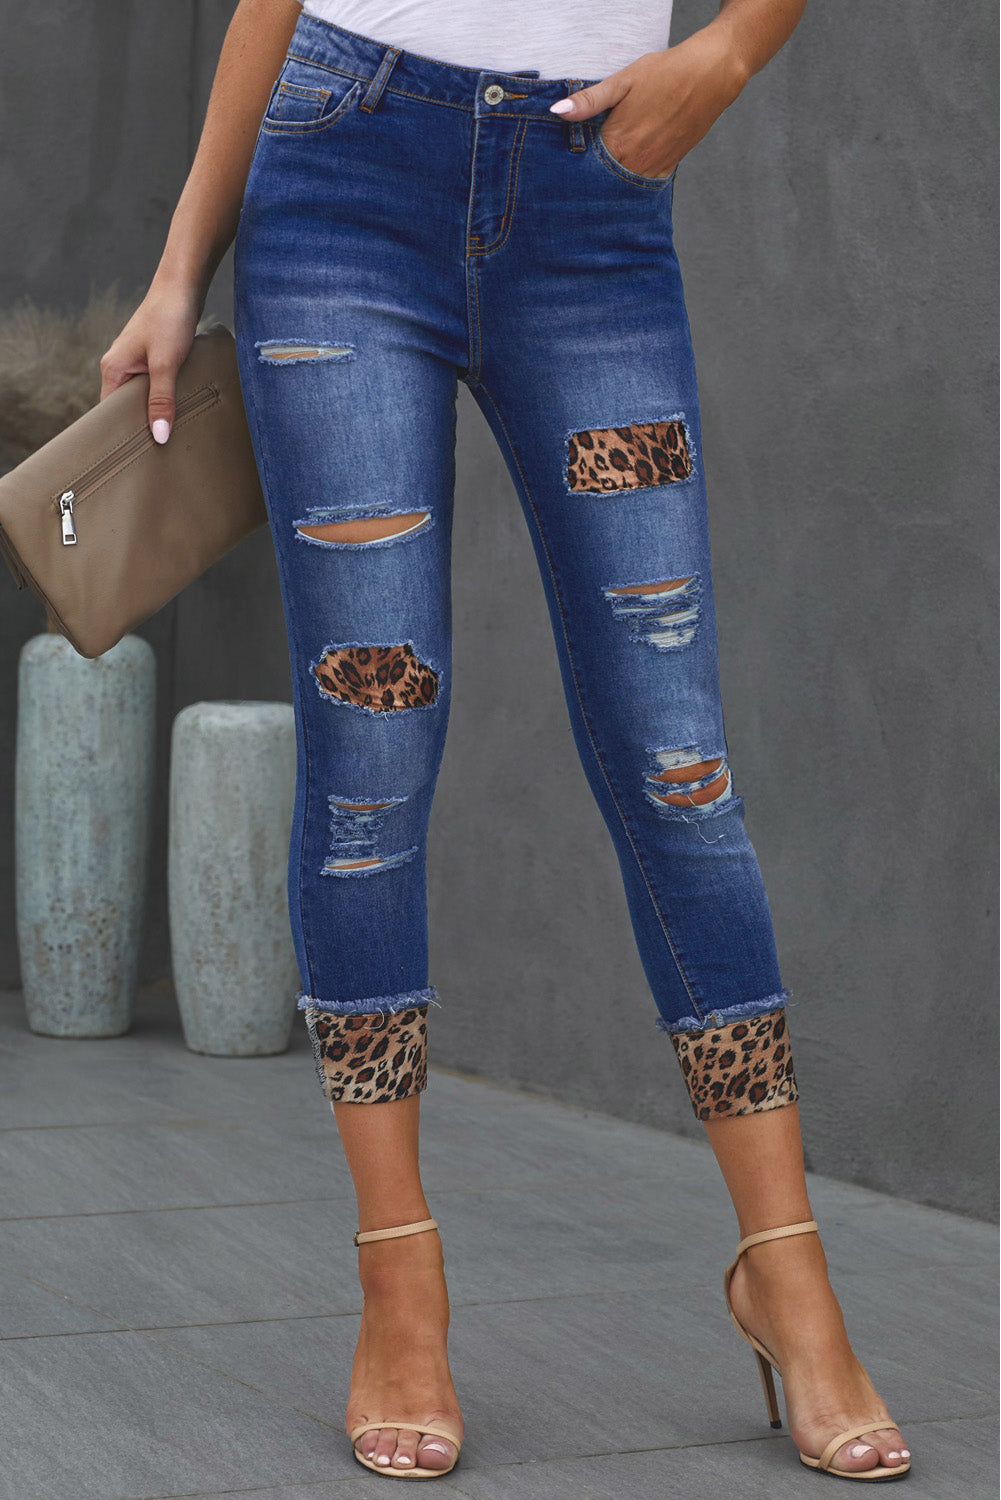 Leopard Pattern Print Ripped Jeans Skinny Leg High Waist Denim Pants with Pockets TURE TO SIZE Sai Feel